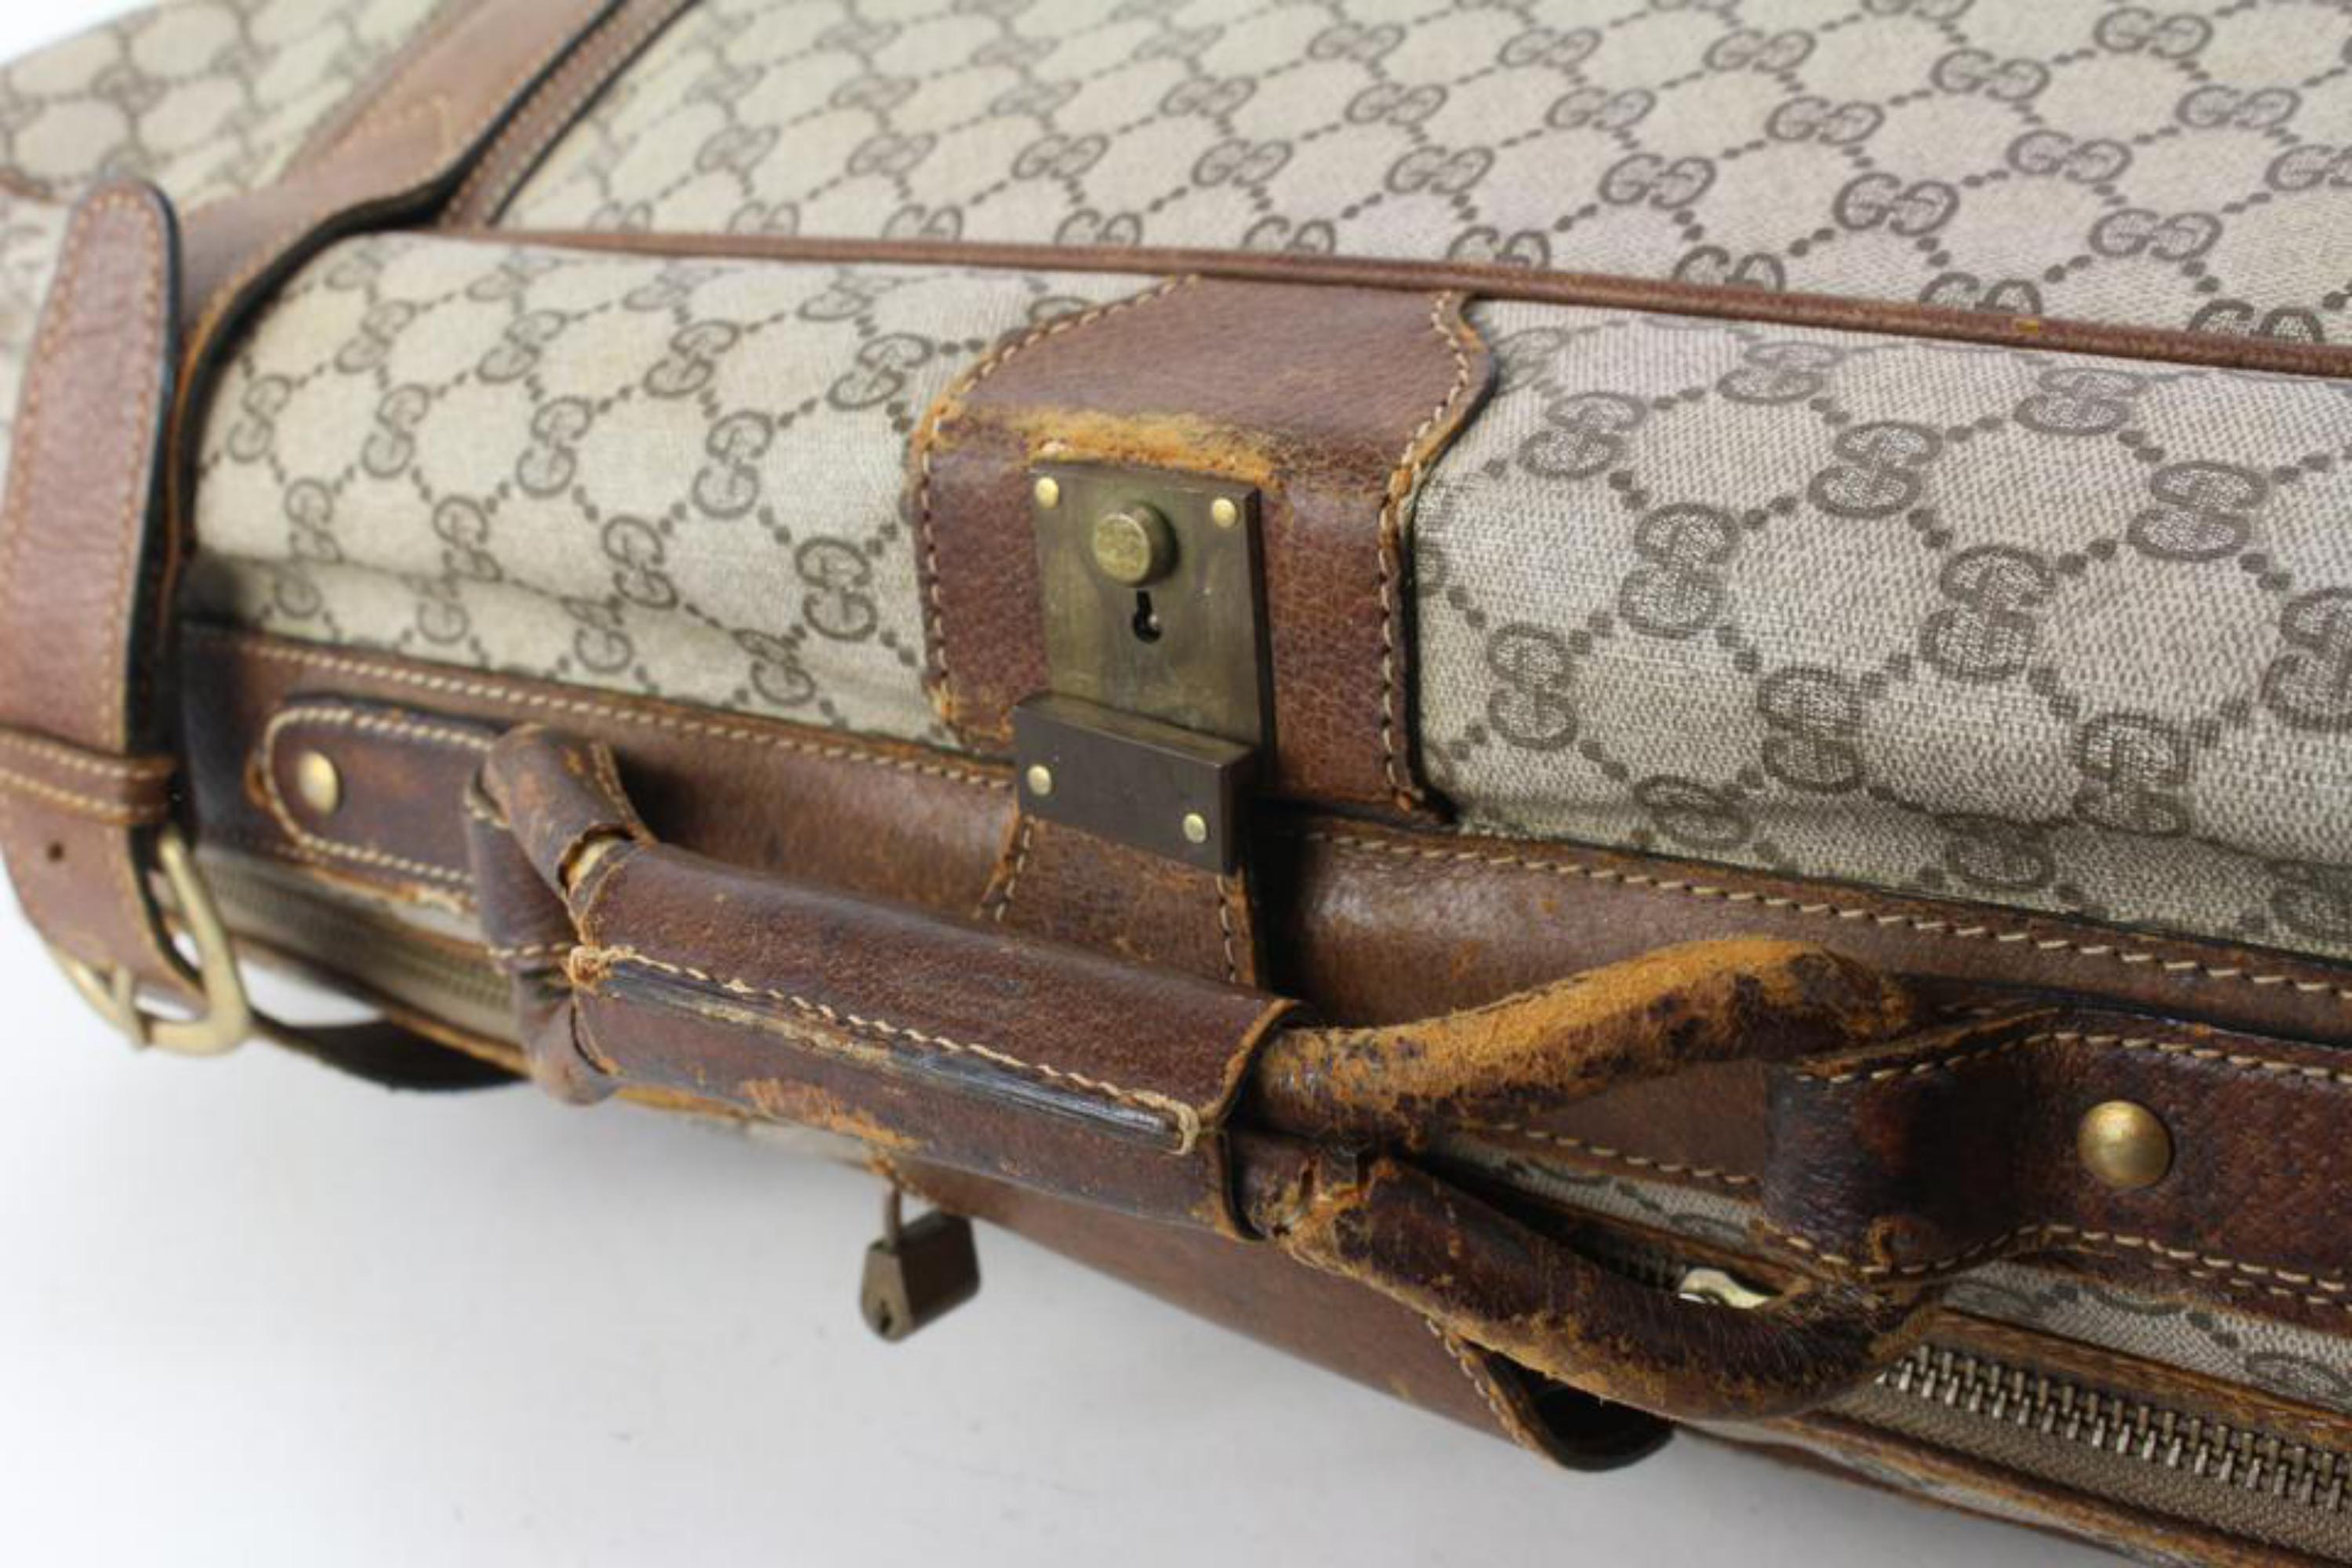 Gucci XL Supreme GG Monogram Web Suitcase Luggage Soft Trunk 62gz429s In Fair Condition For Sale In Dix hills, NY